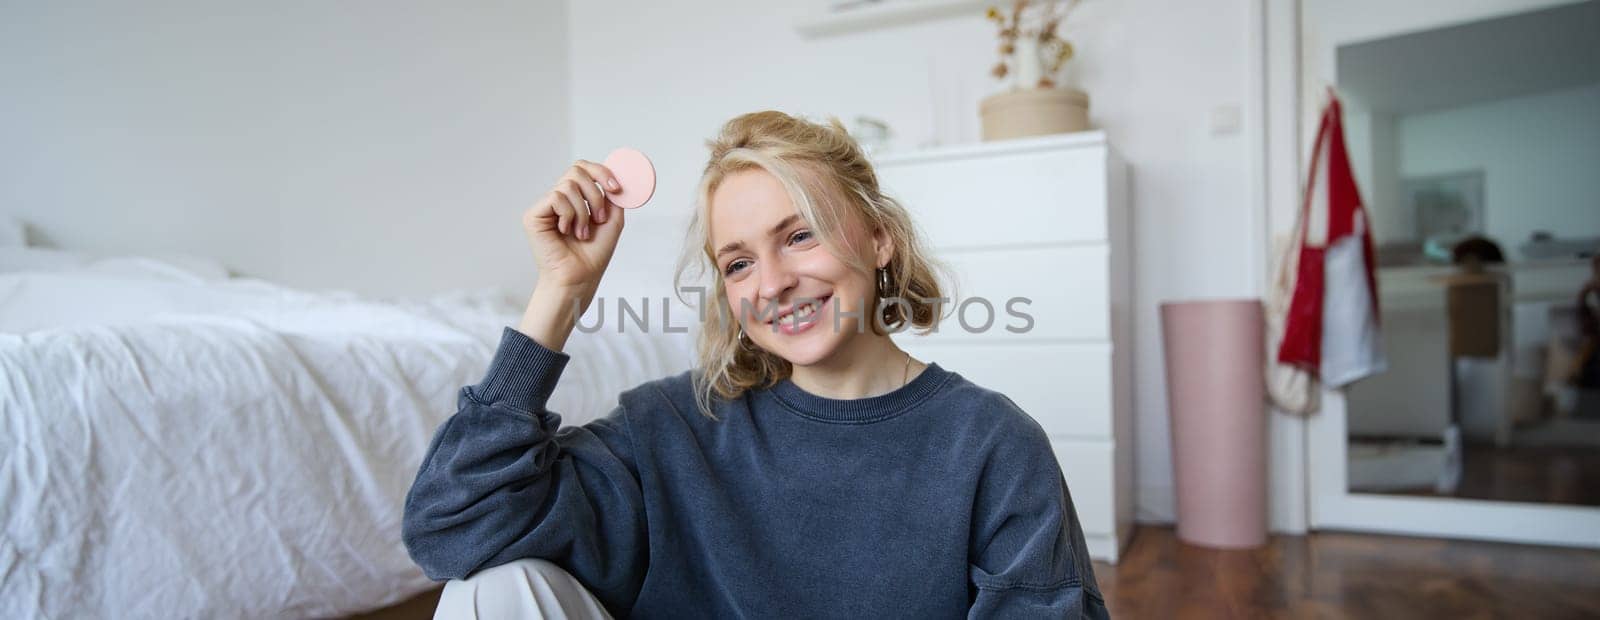 Portrait of beautiful and stylish young woman, vlogger recording video on her digital camera in a room, showing beauty products, making makeup tutorial for followers on social media.